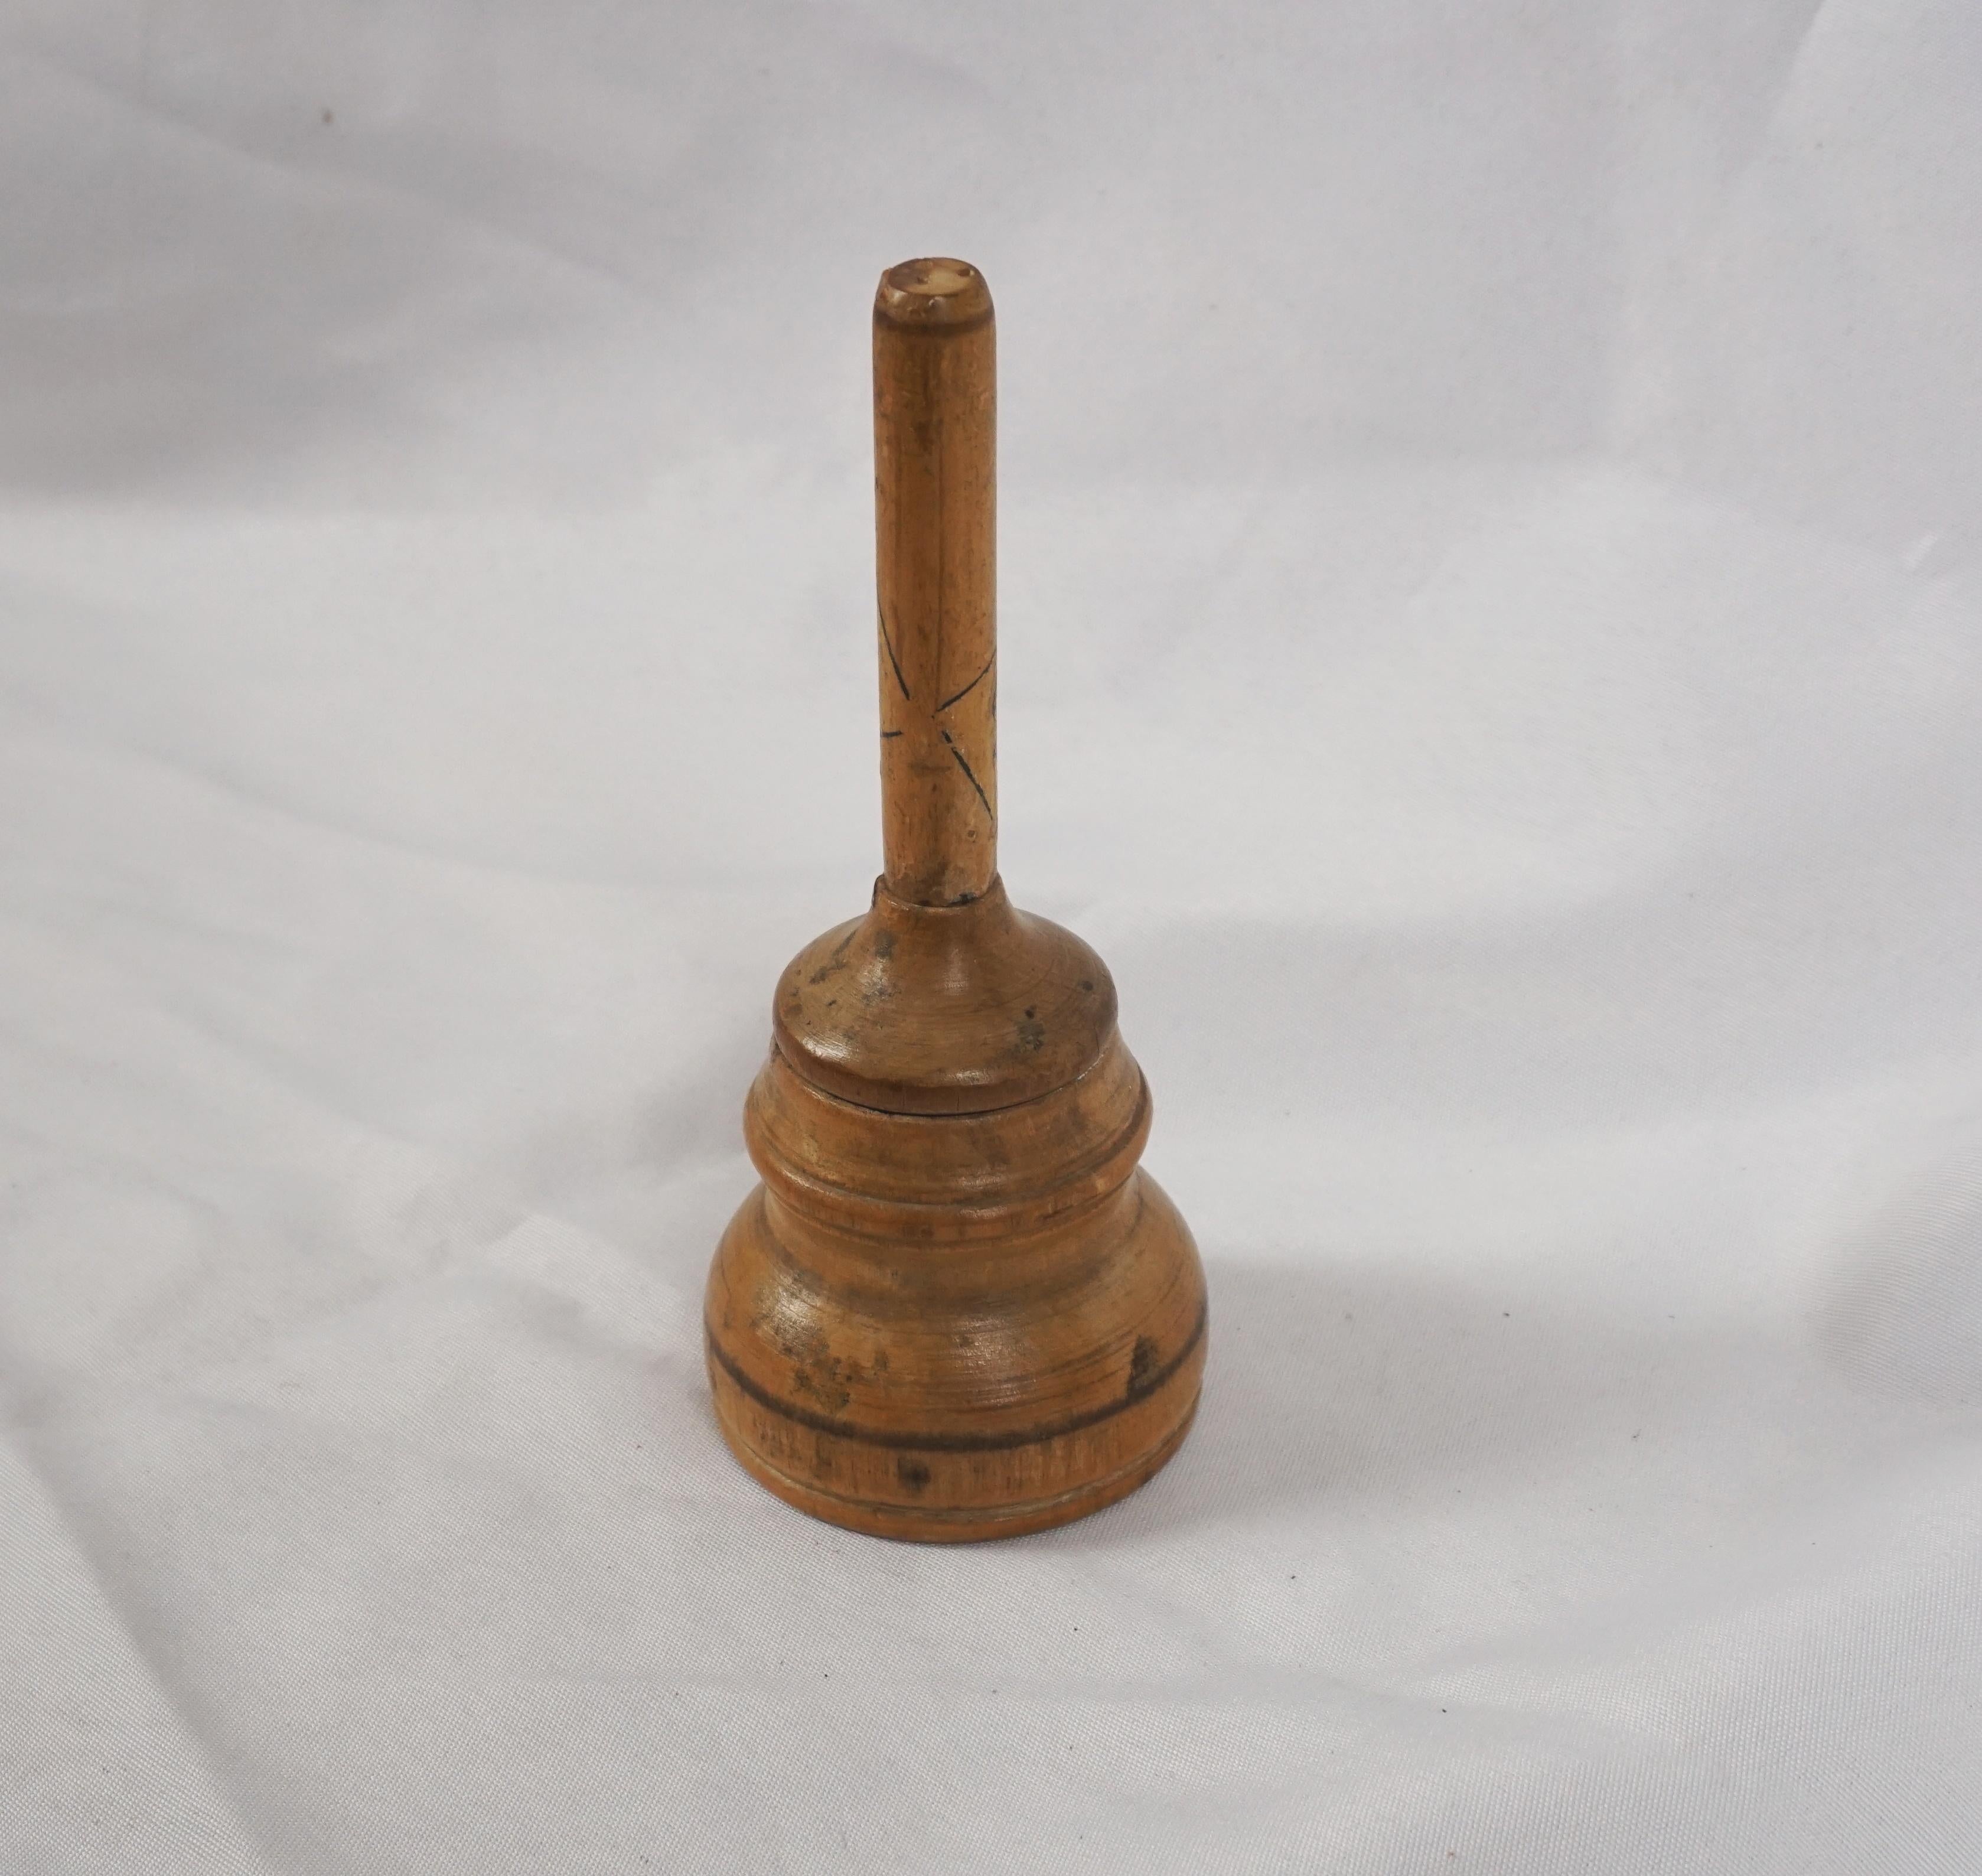 Vintage wooden bell, Inkwell Insert, Scandinavia 1930s, B2814

Scandinavia 1930
Solid Wood
Top Unscrews From The Base
Handle Pulls Up To Reveal An Inkwell 
No Insert 

B2814

Measures: 2.75